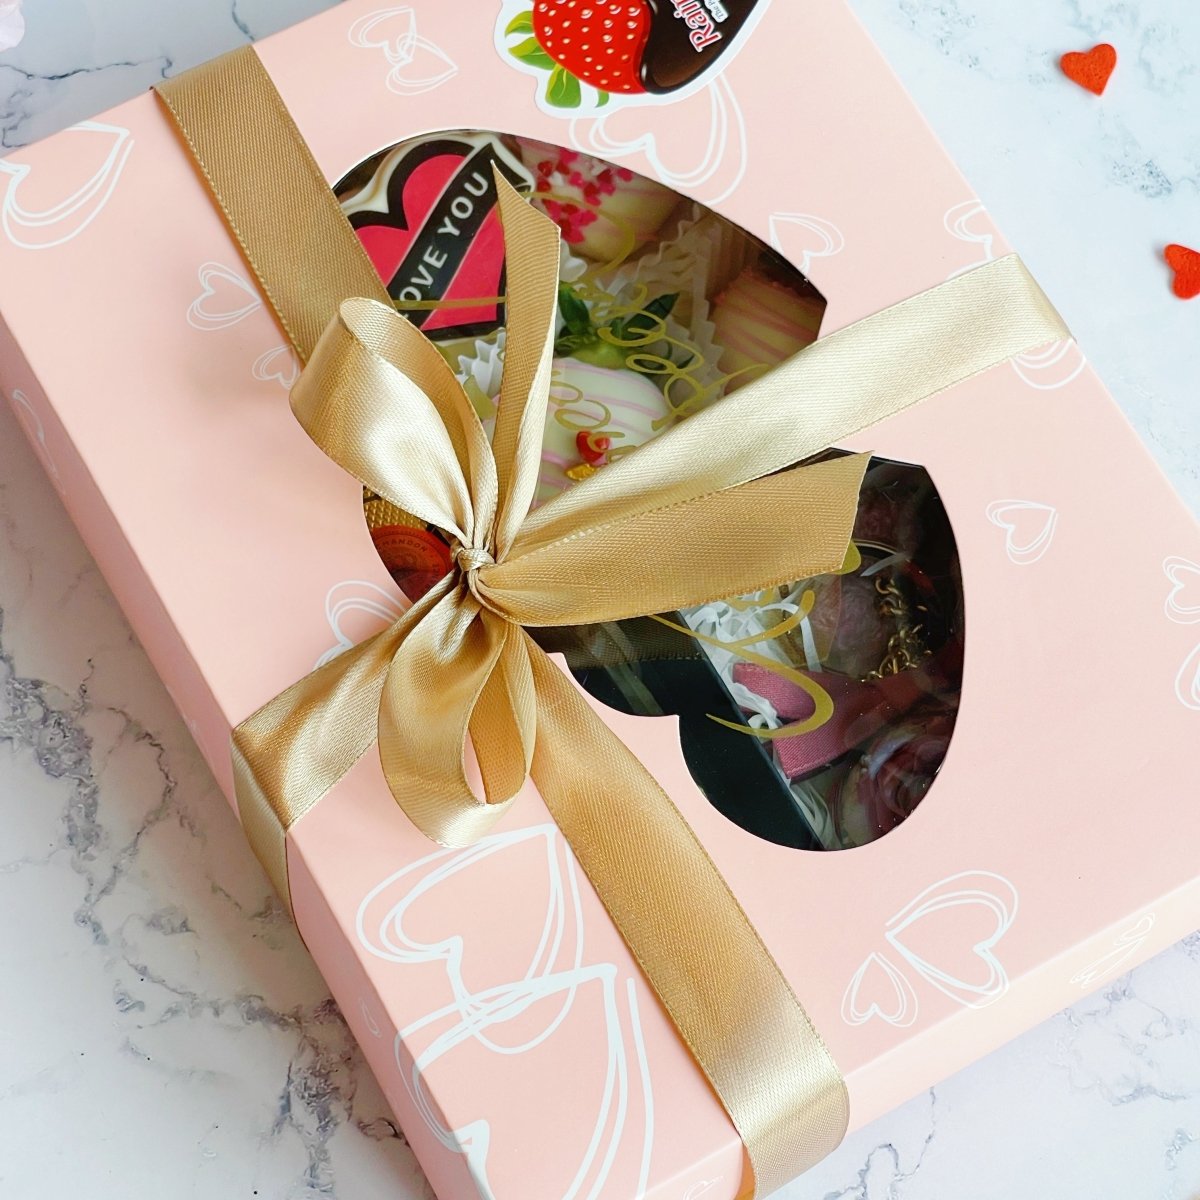 Special Chocolate Coated Strawberries with Mini Moet & Charming Pink Preserved Flower Keychain Bundle set - Rainbowly Fresh Fruit Gift and Flower Arrangments